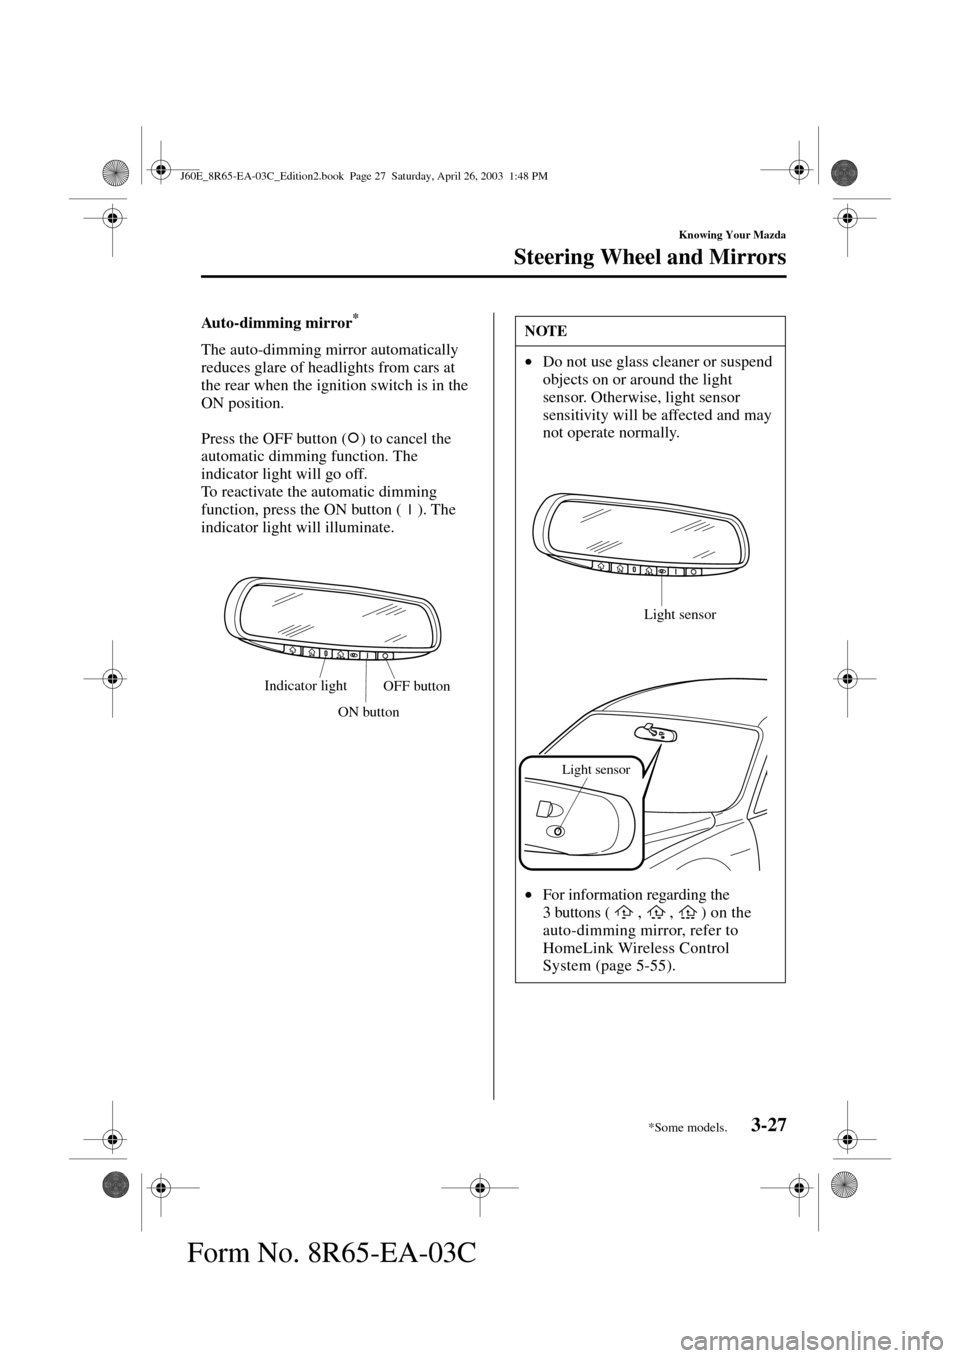 MAZDA MODEL RX 8 2004  Owners Manual (in English) 3-27
Knowing Your Mazda
Steering Wheel and Mirrors
Form No. 8R65-EA-03C
Auto-dimming mirror*
The auto-dimming mirror automatically 
reduces glare of headlights from cars at 
the rear when the ignition